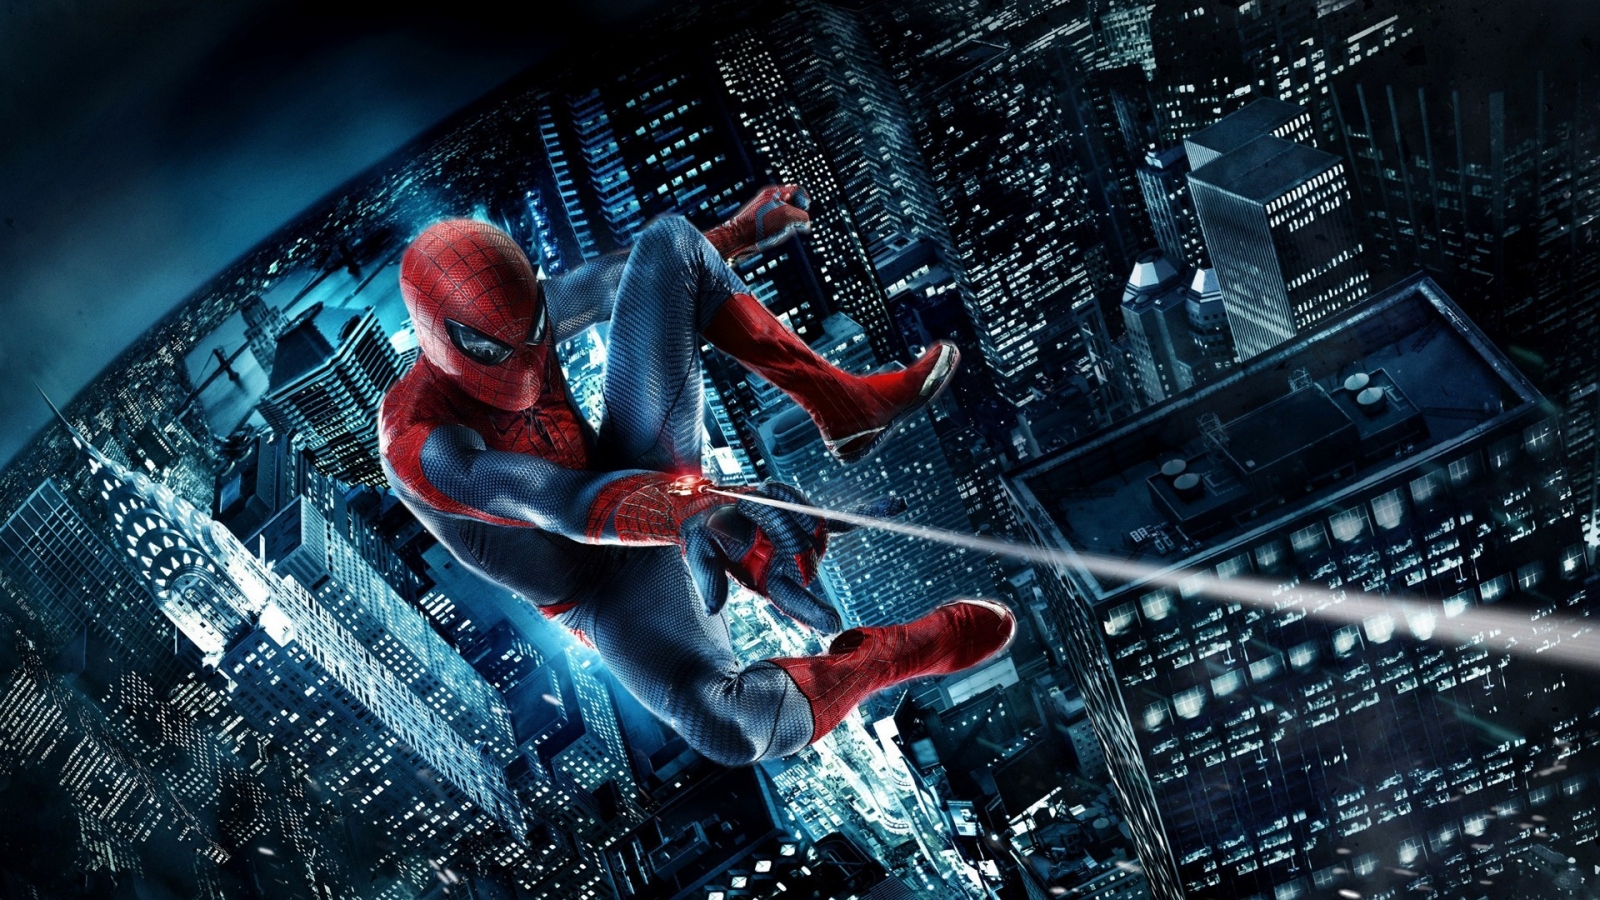 The Amazing SpiderMan 2 for 1600 x 900 HDTV resolution